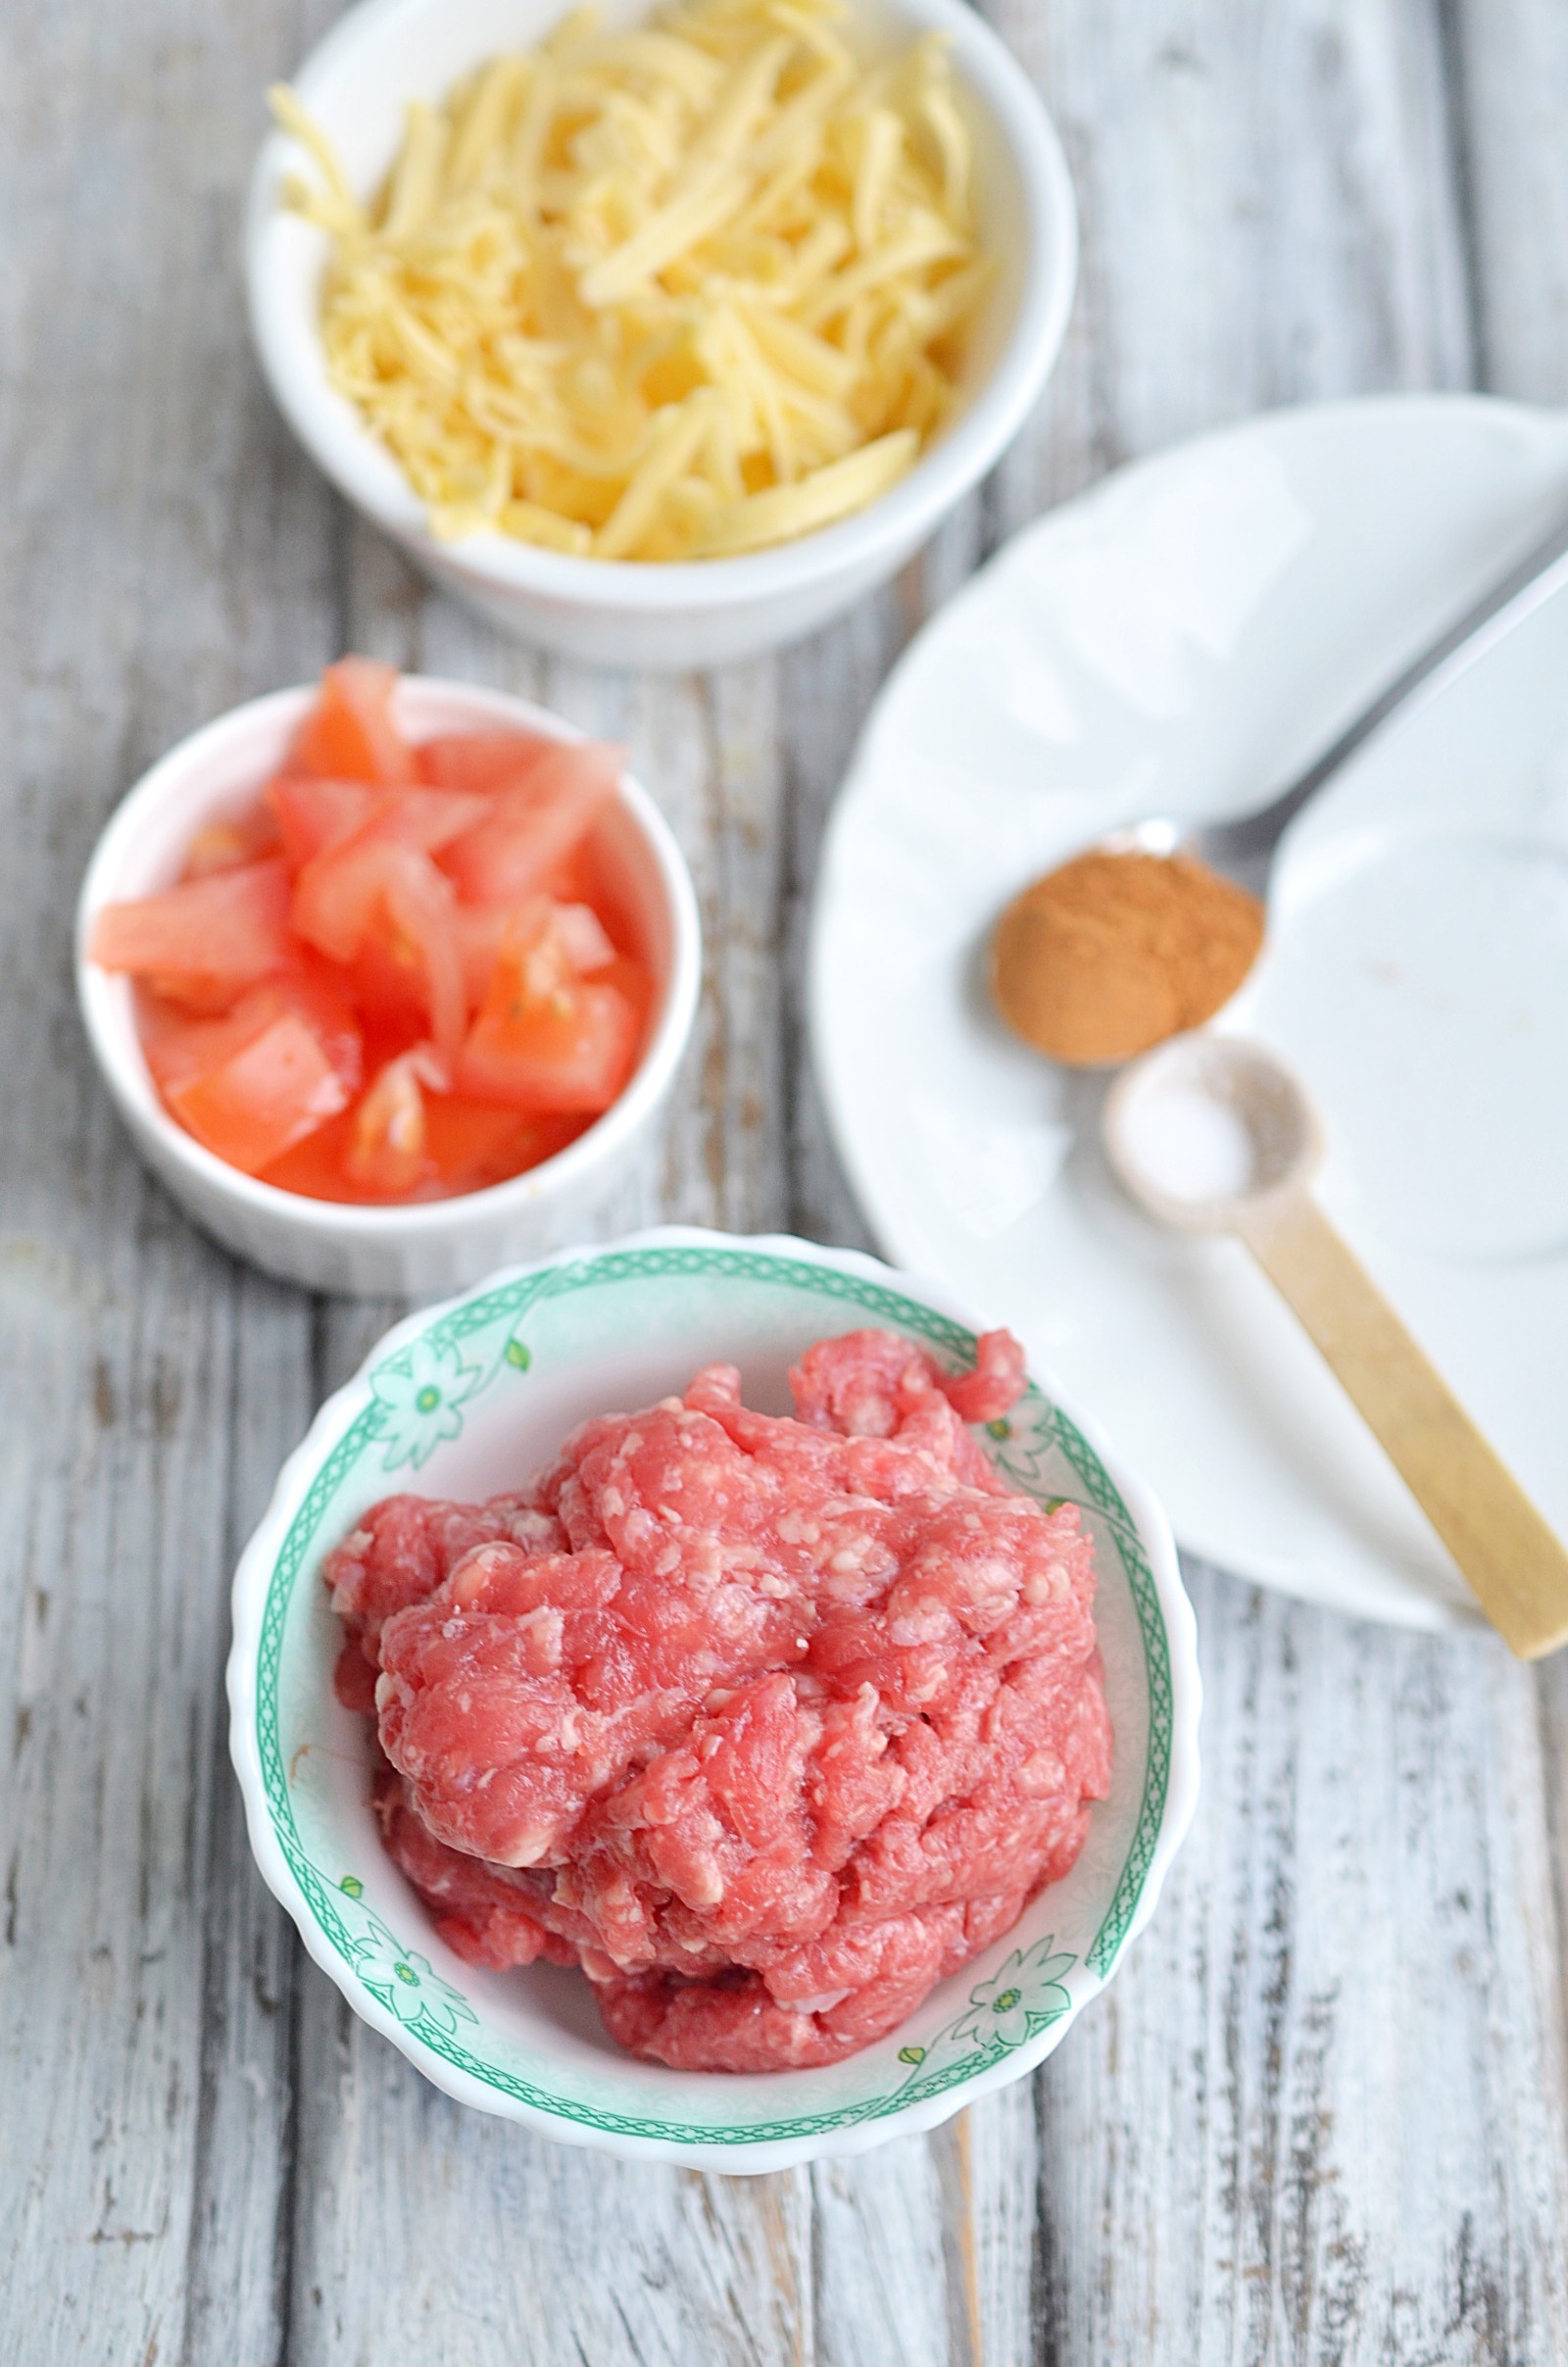 A bowl of shredded cheese, tomatoes, and raw ground beef.